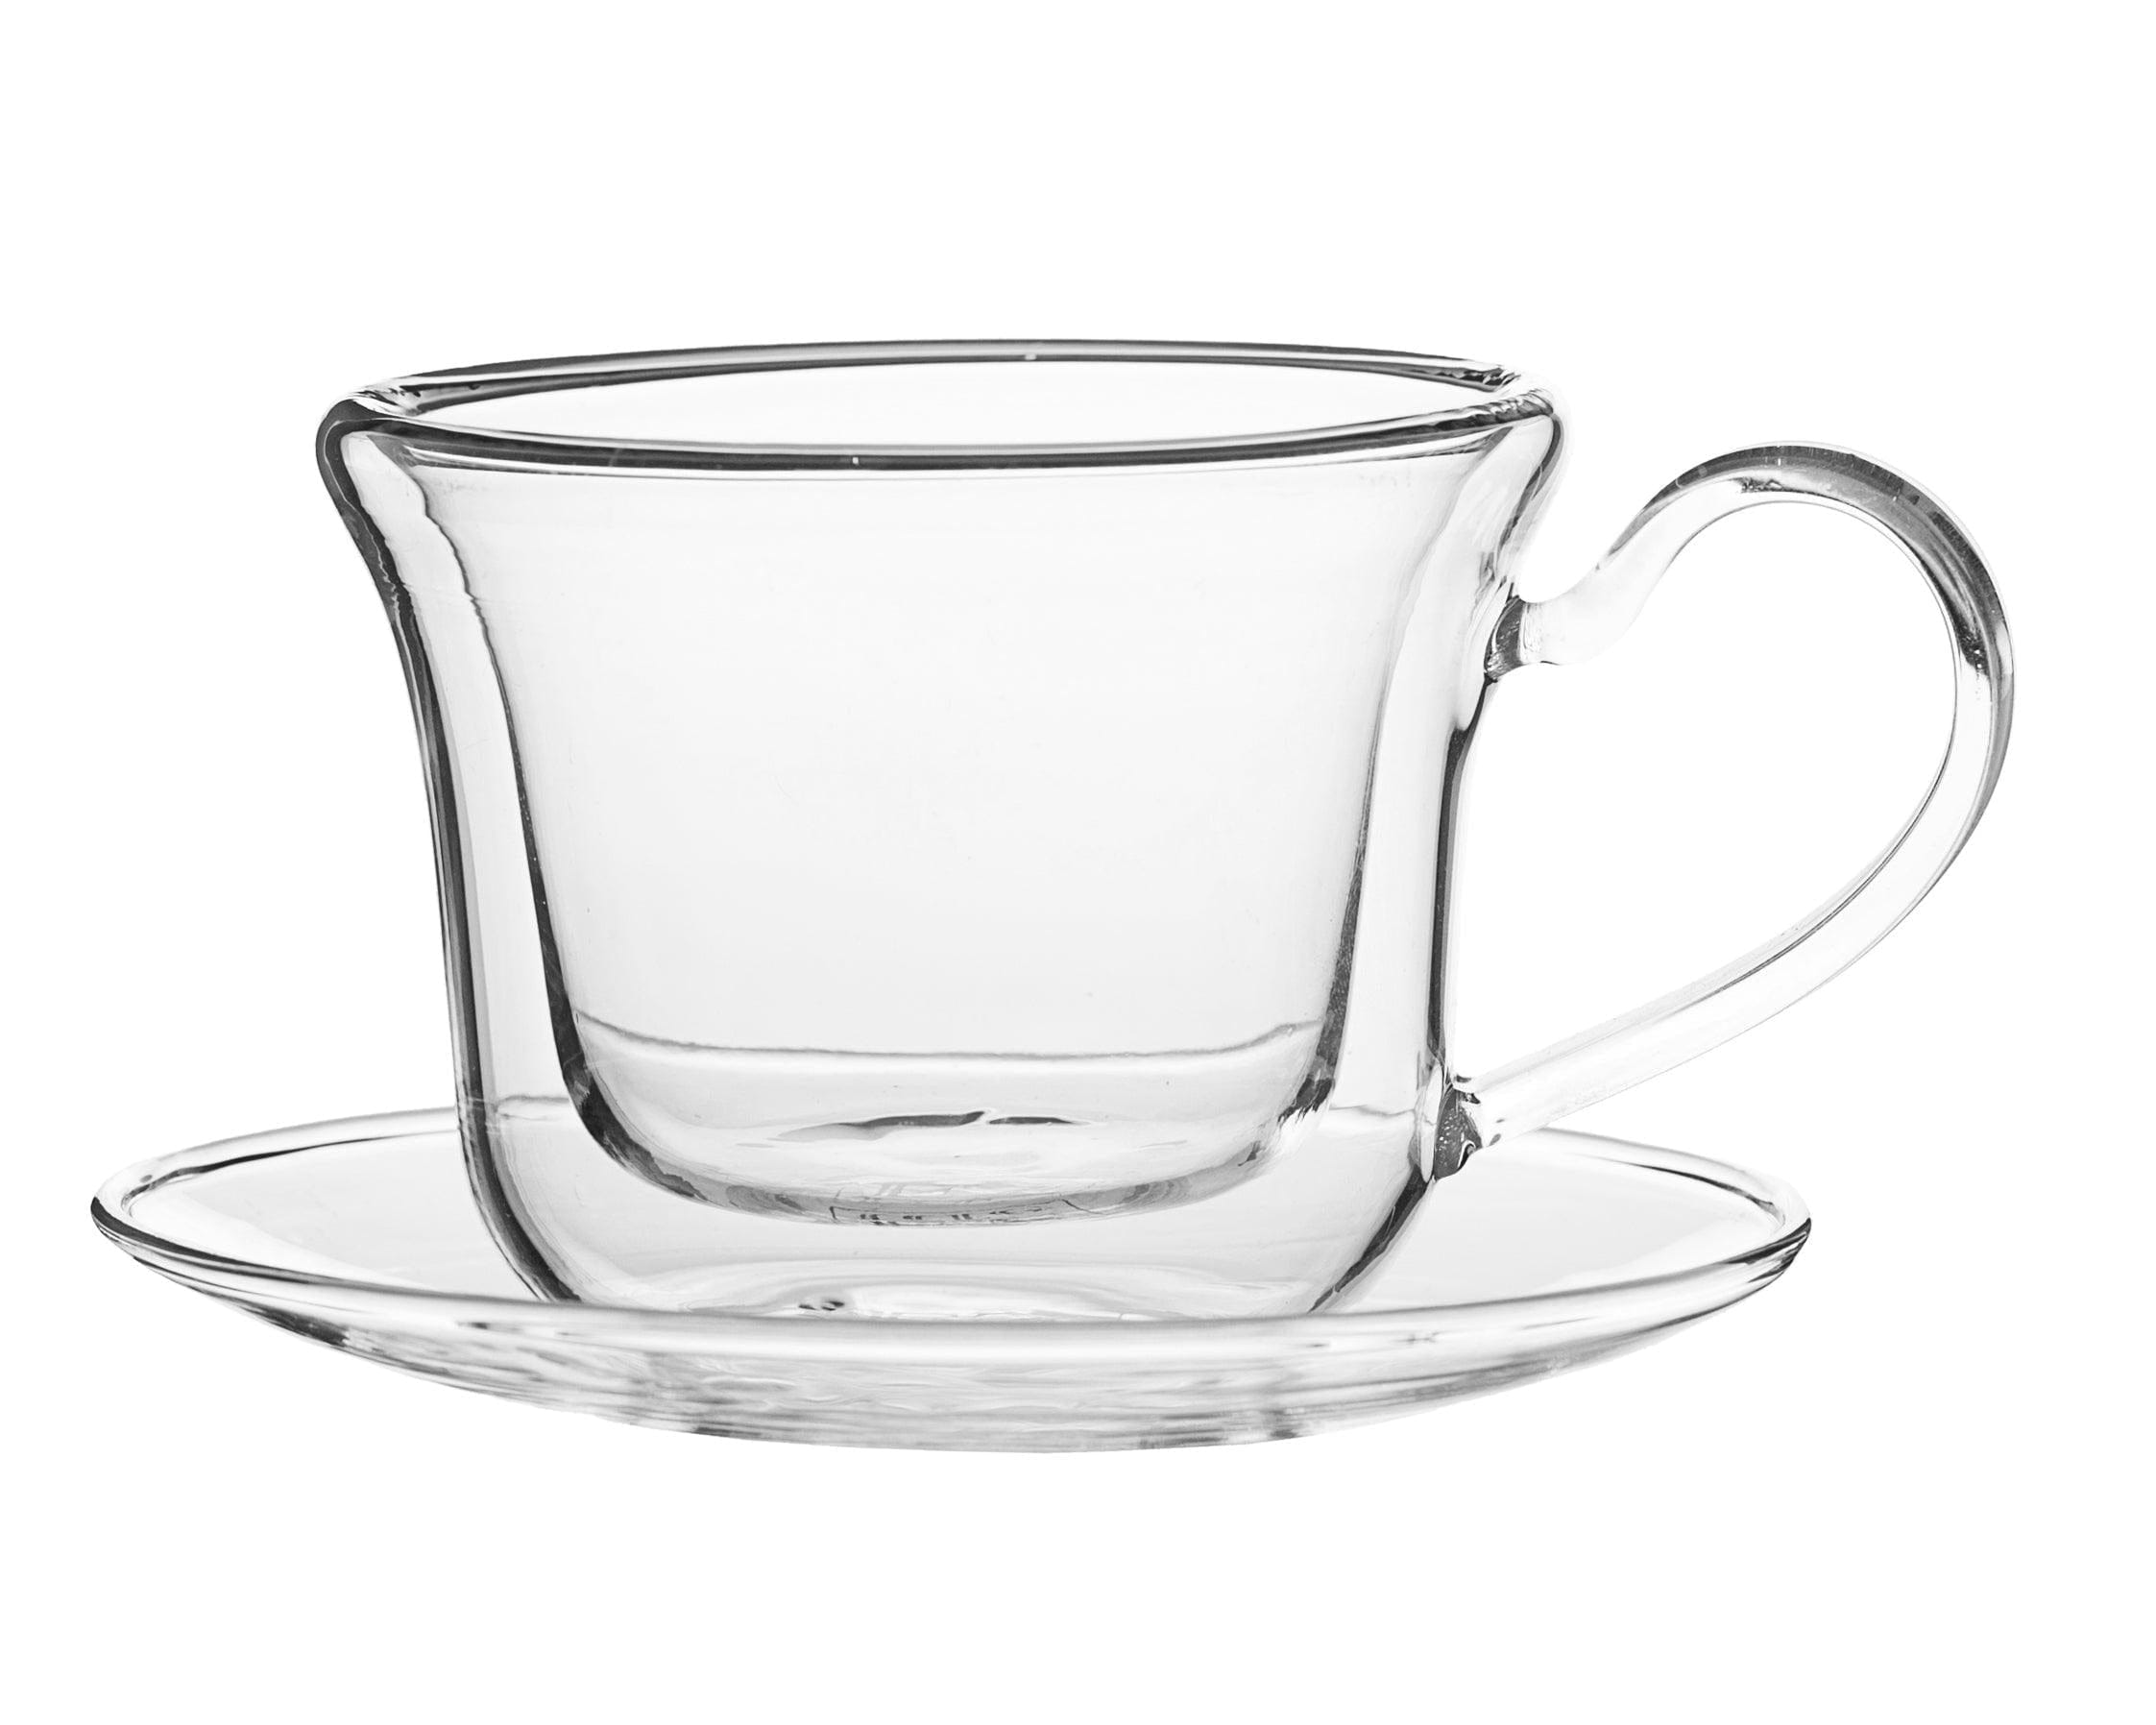 Double Wall Glass Royal Tea Cup Set with Saucers (250 ml) (Set of 6)